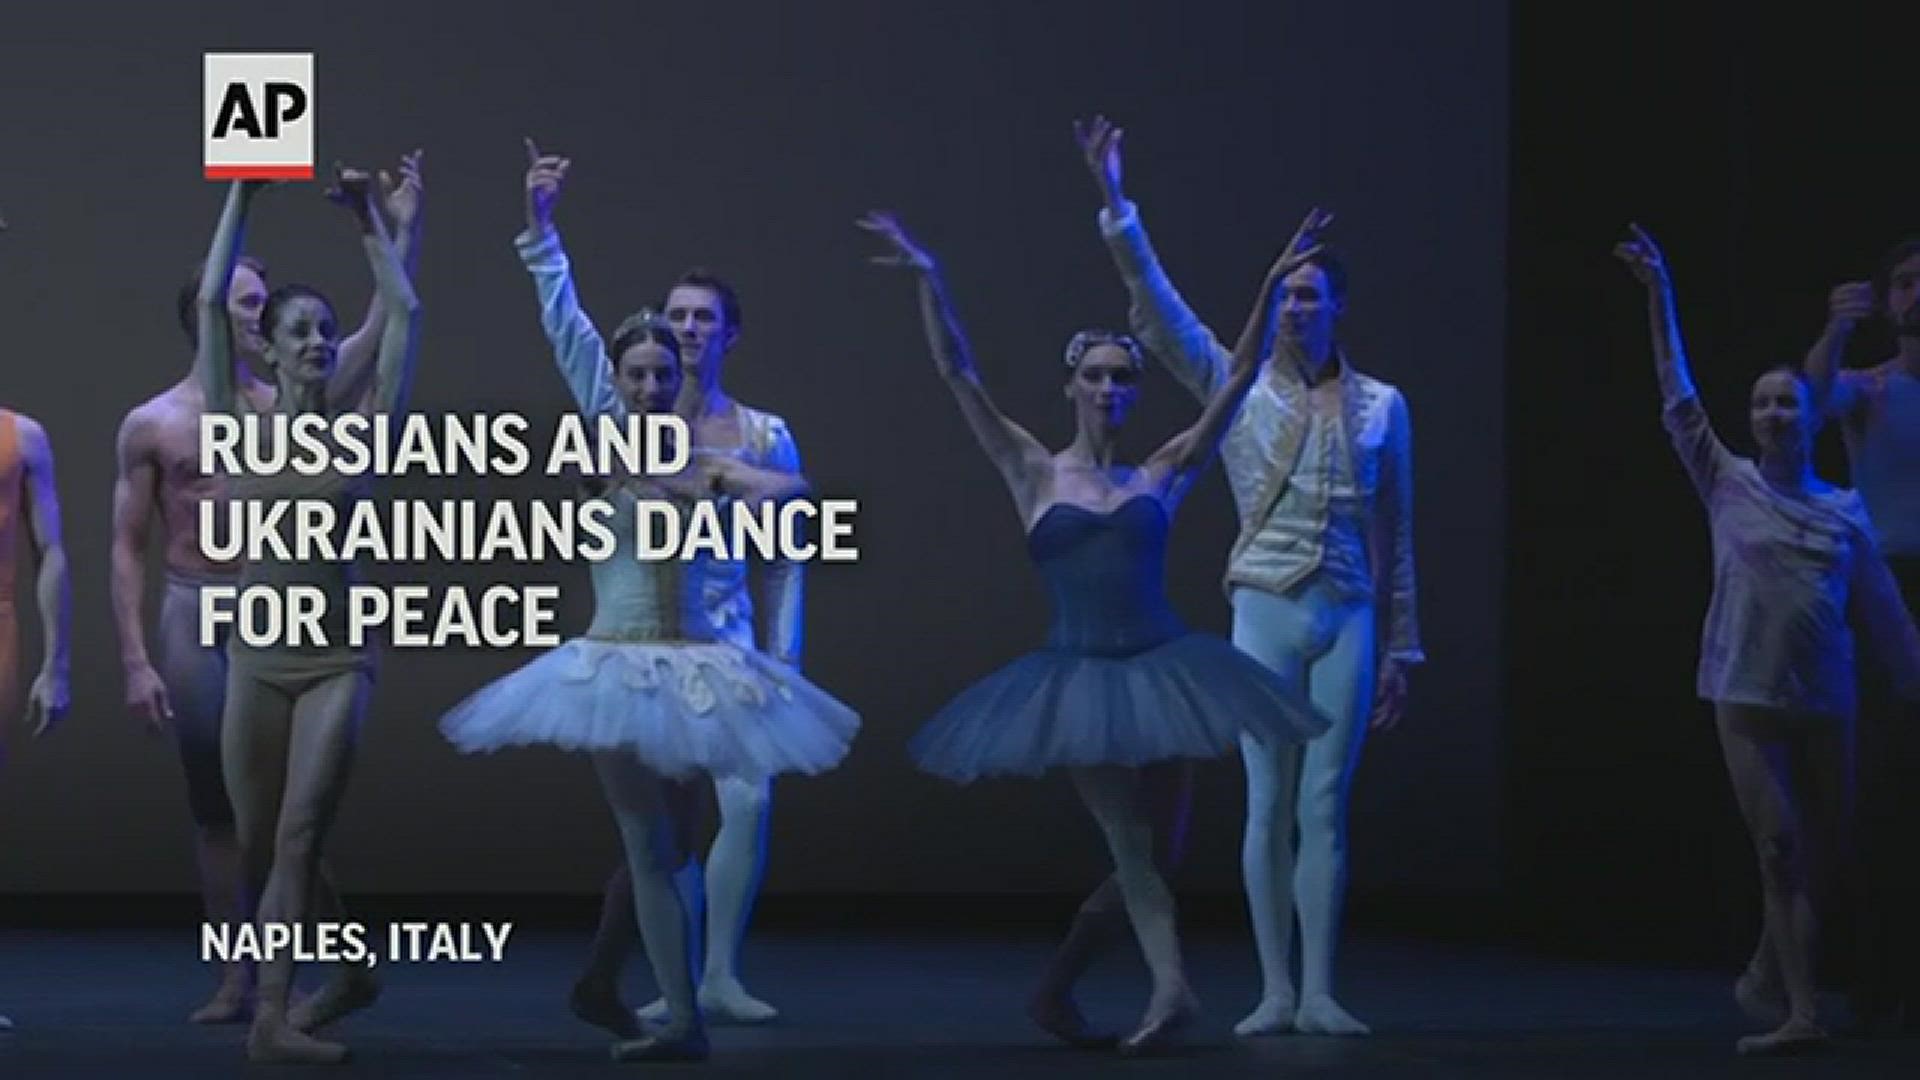 World renowned ballet dancers from Russia and Ukraine danced together in a suggestive performance in Italy to appeal for peace.